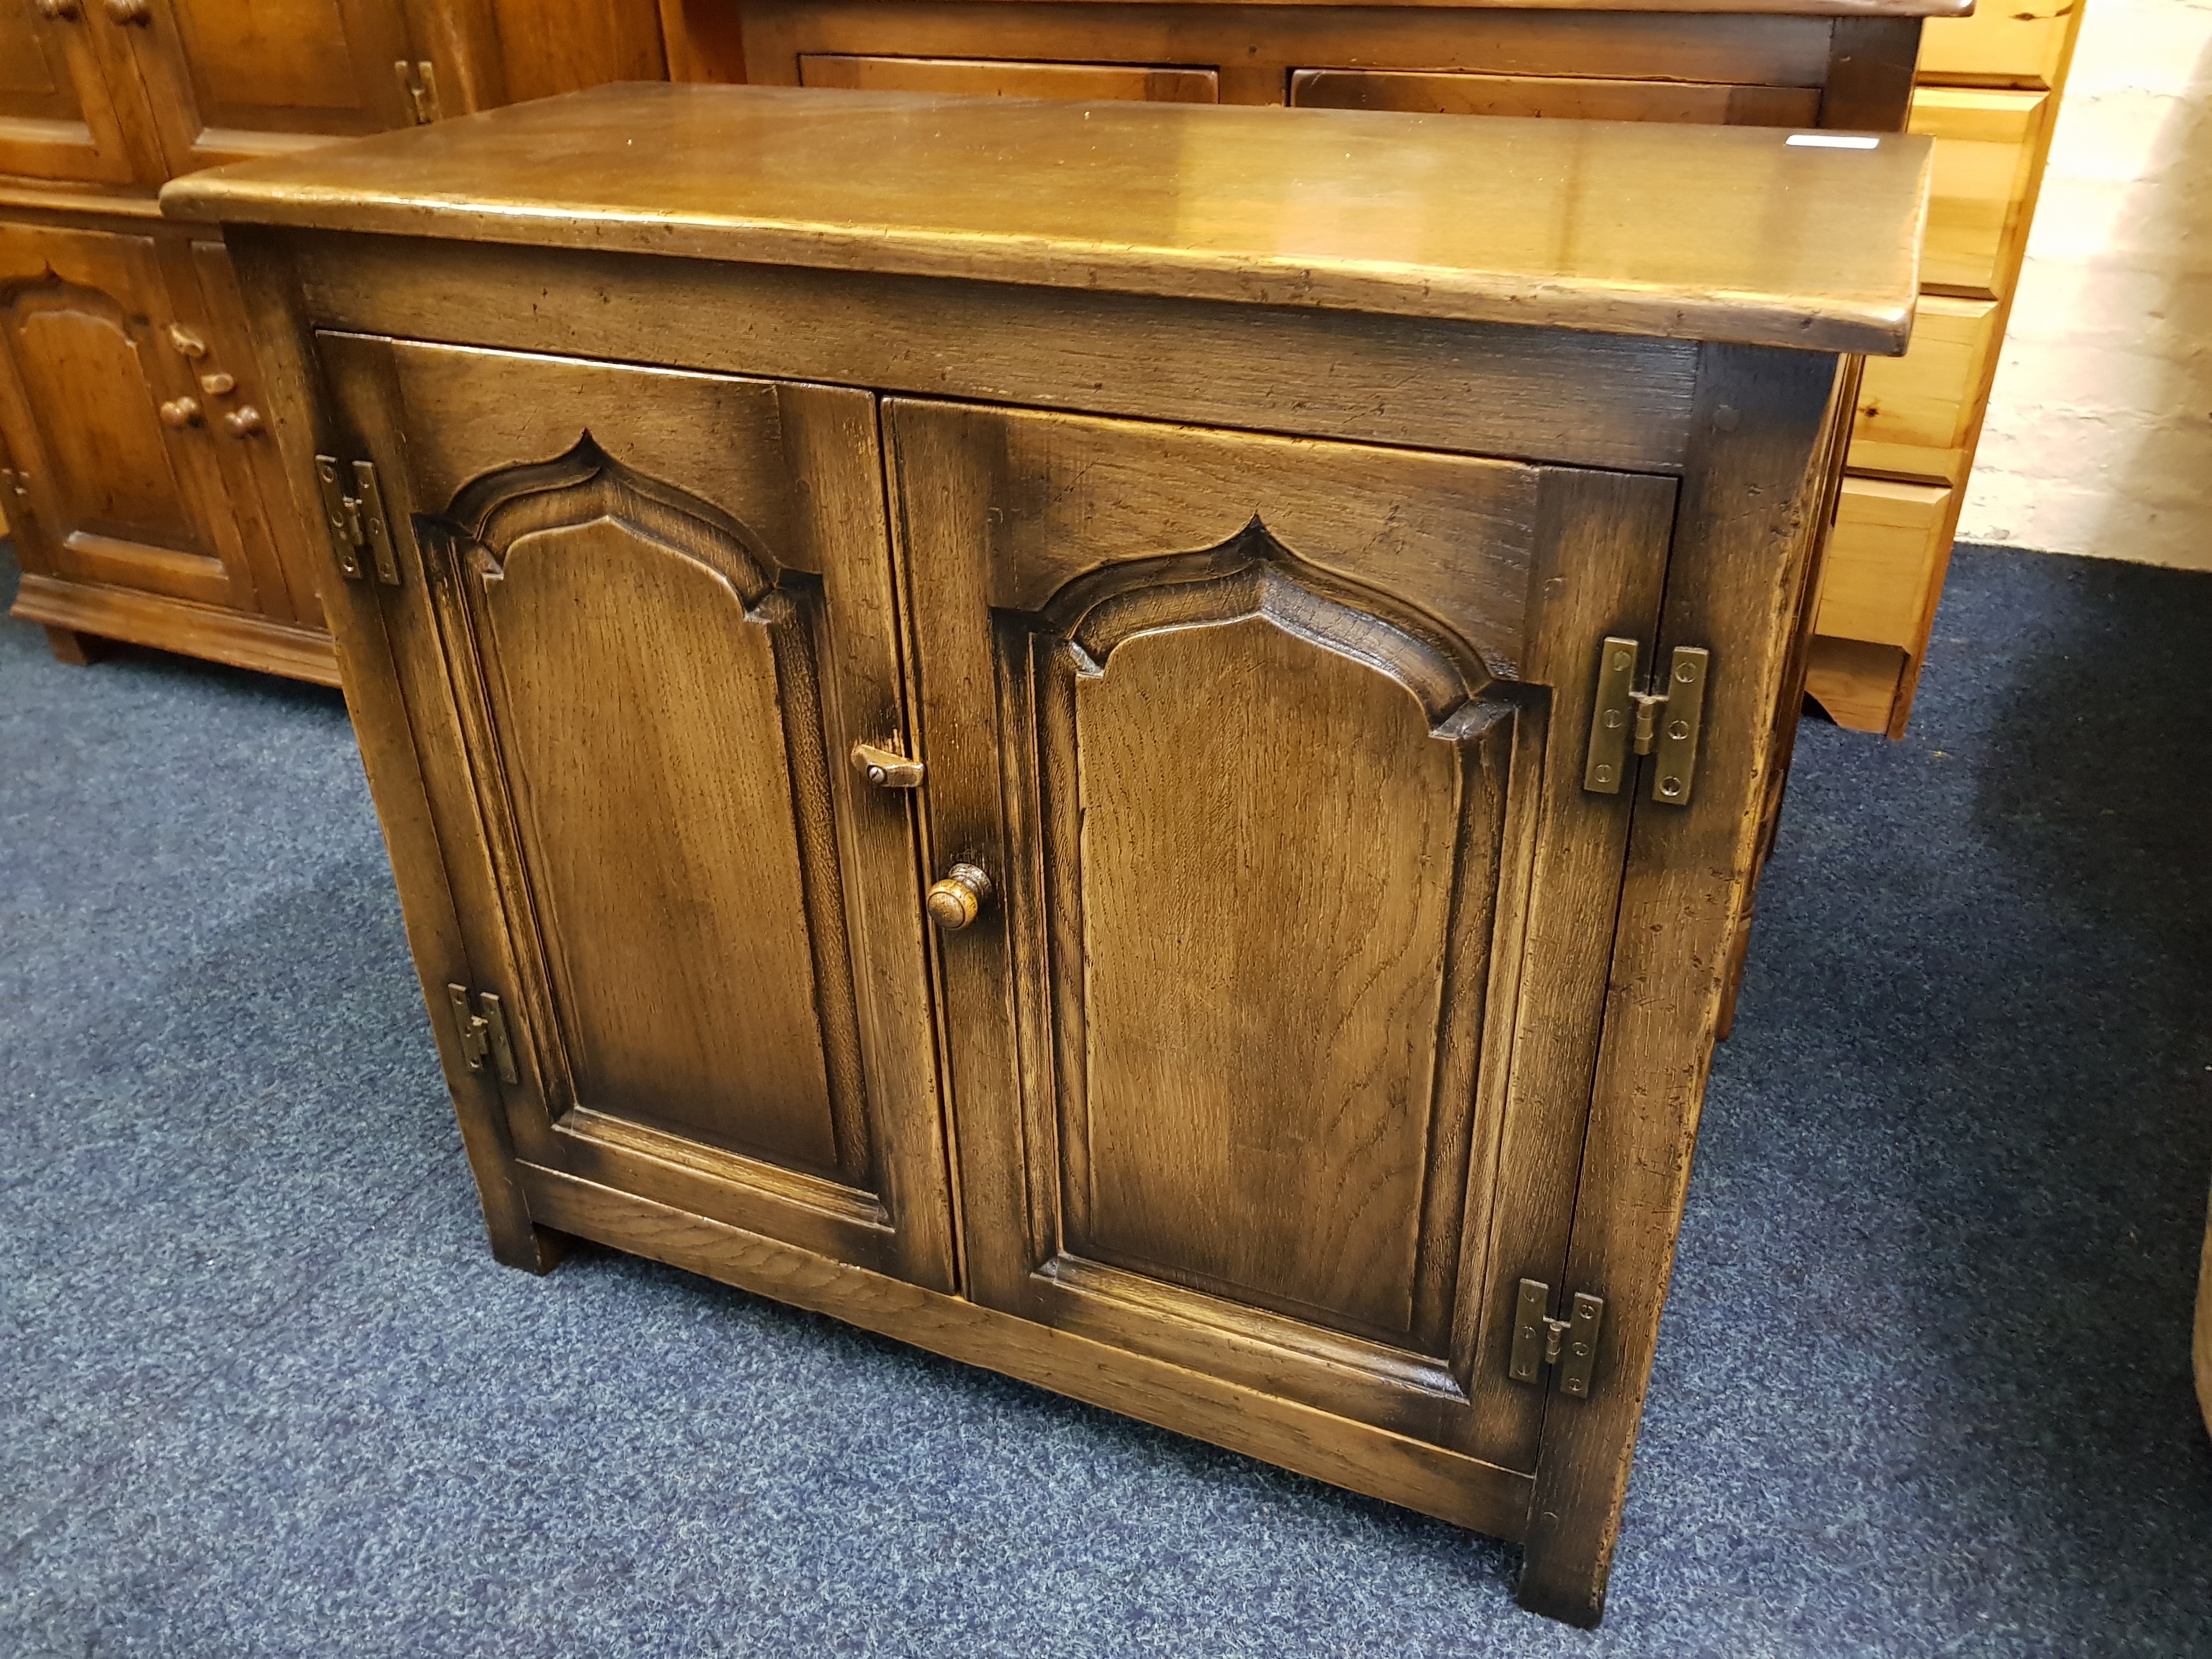 A reproduction distressed oak two door cupboard.